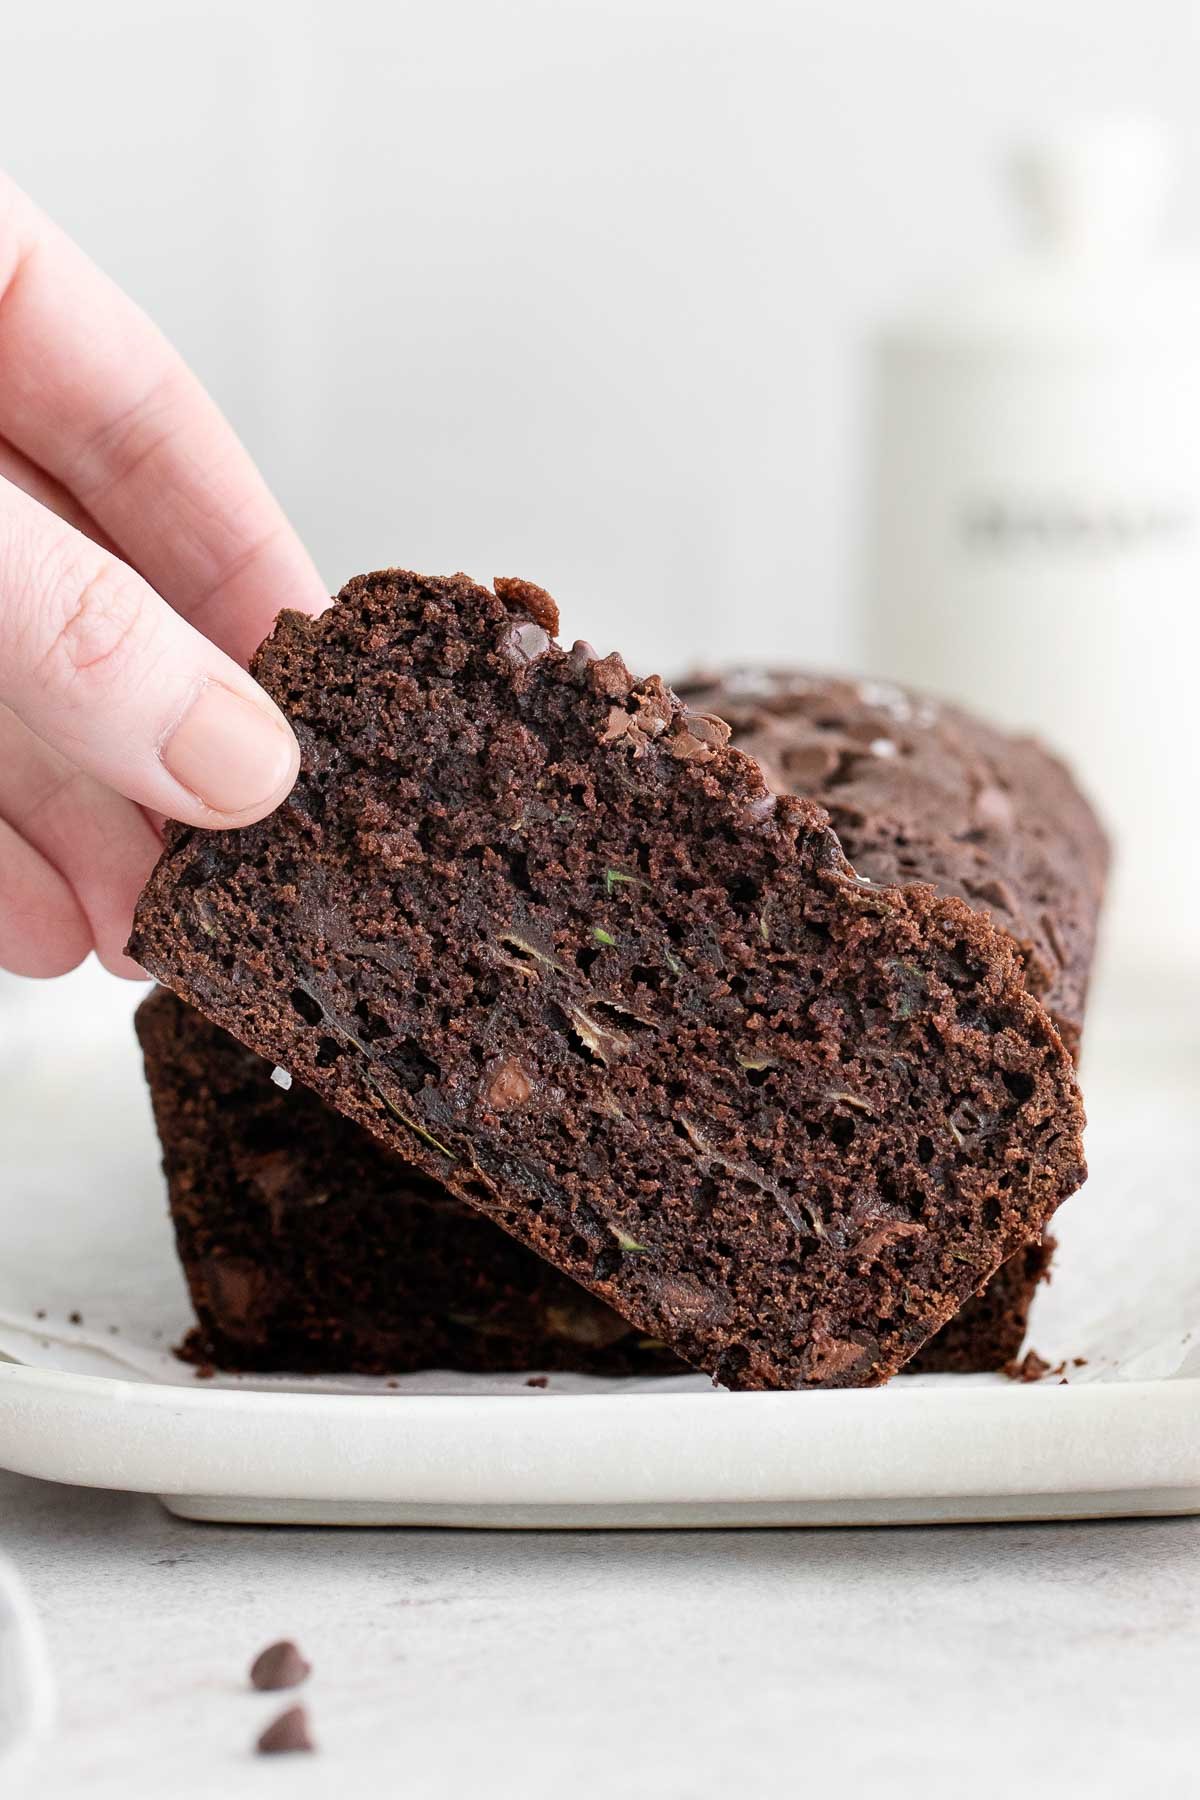 a slice of chocolate zucchini bread being picked up with a woman's fingers